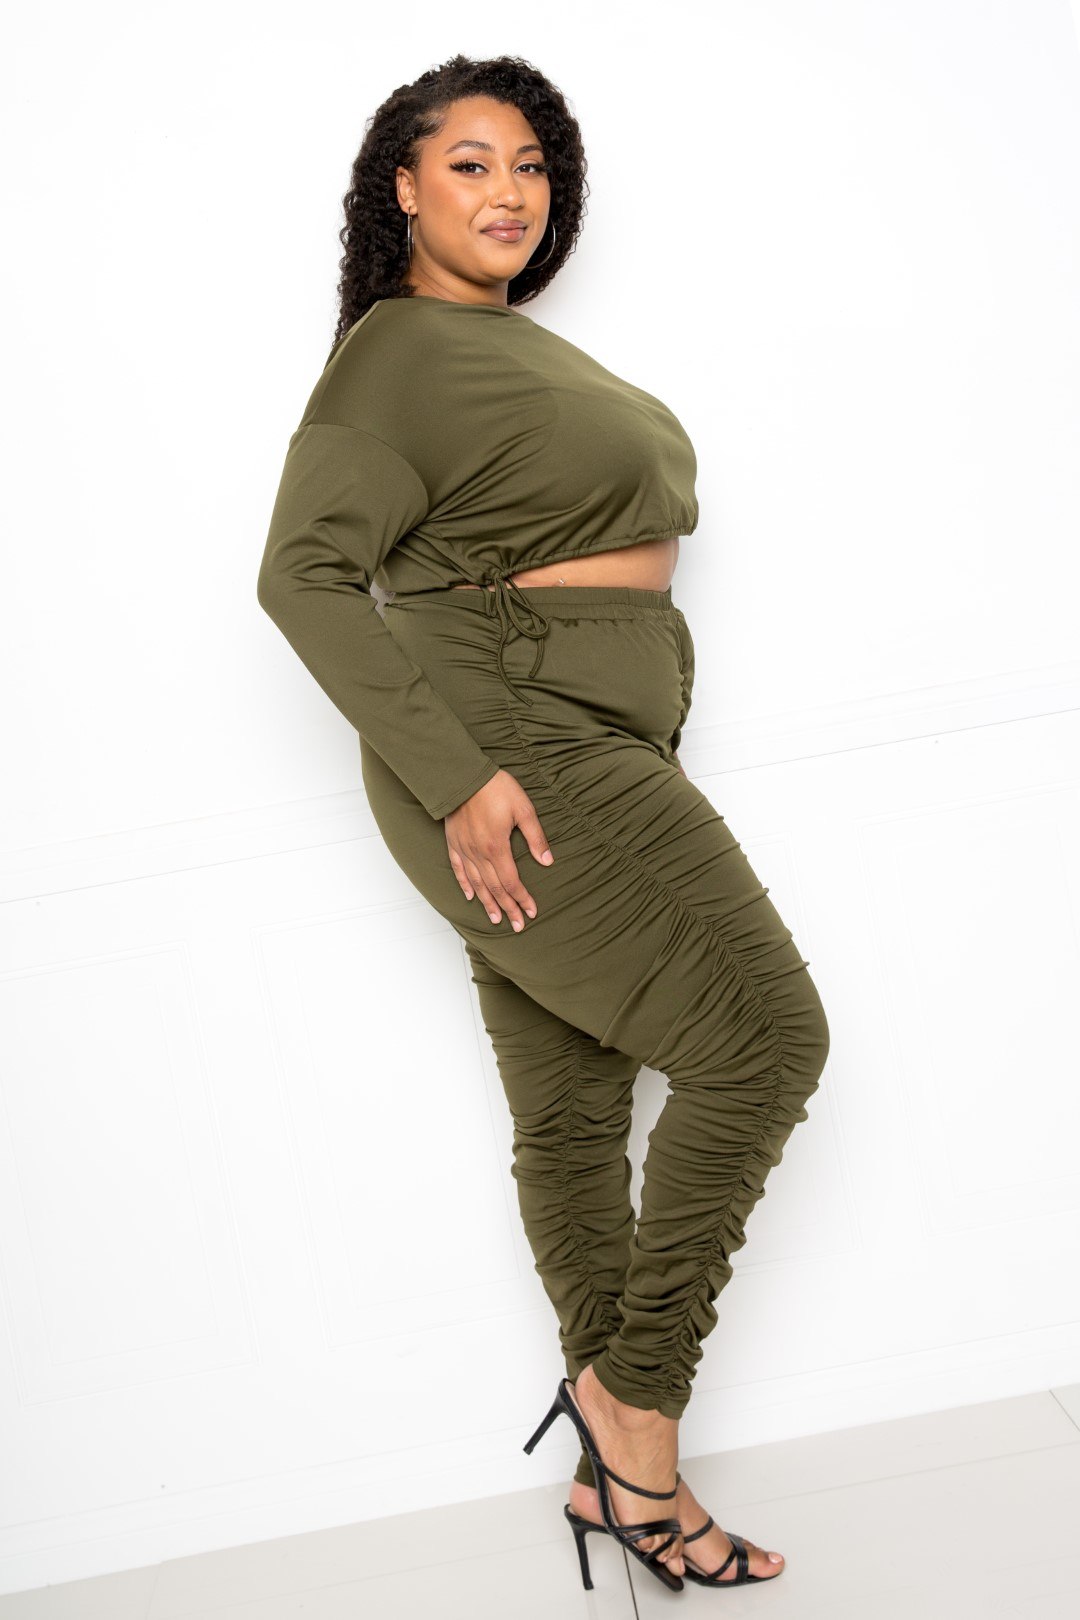 Off Shoulder Cropped Top And Ruched Leggings Sets | Black, Olive, PLUS SIZE, PLUS SIZE SETS, RESTOCKED POPULAR ITEMS, SALE, SALE PLUS SIZE | Style Your Curves